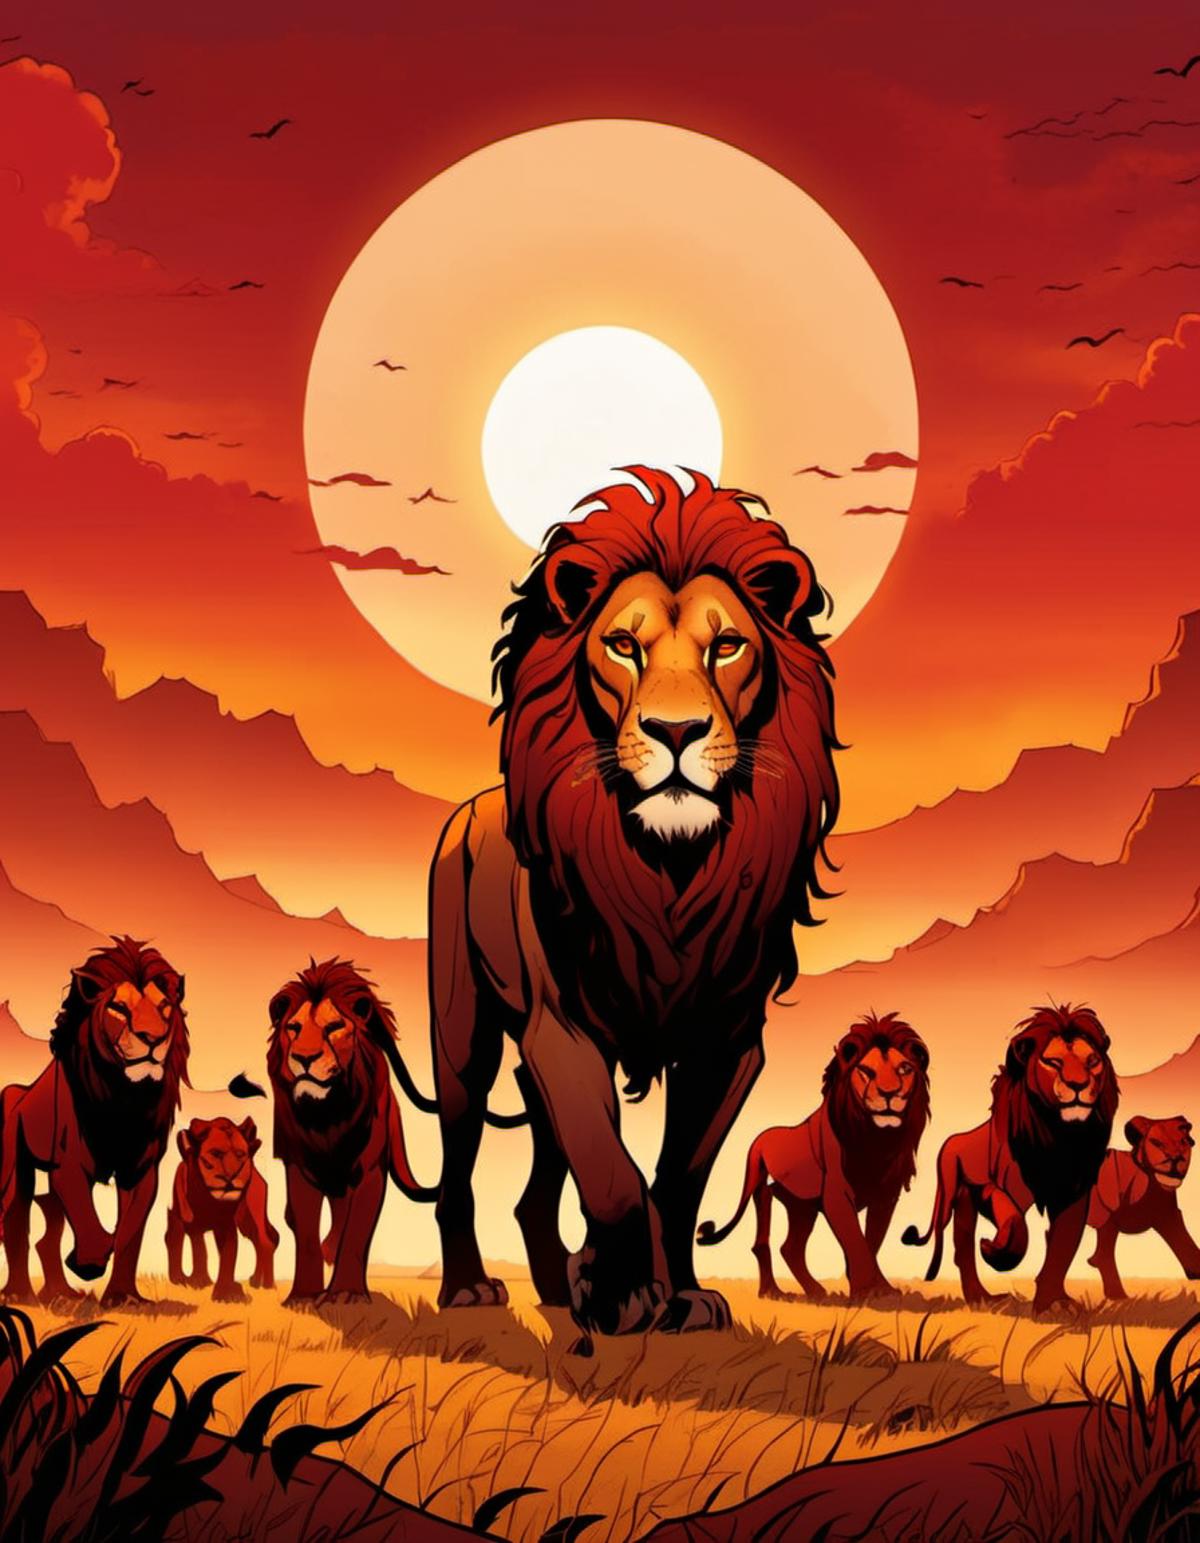 A Lion Leads His Pack at Sunset in an Artistic Illustration